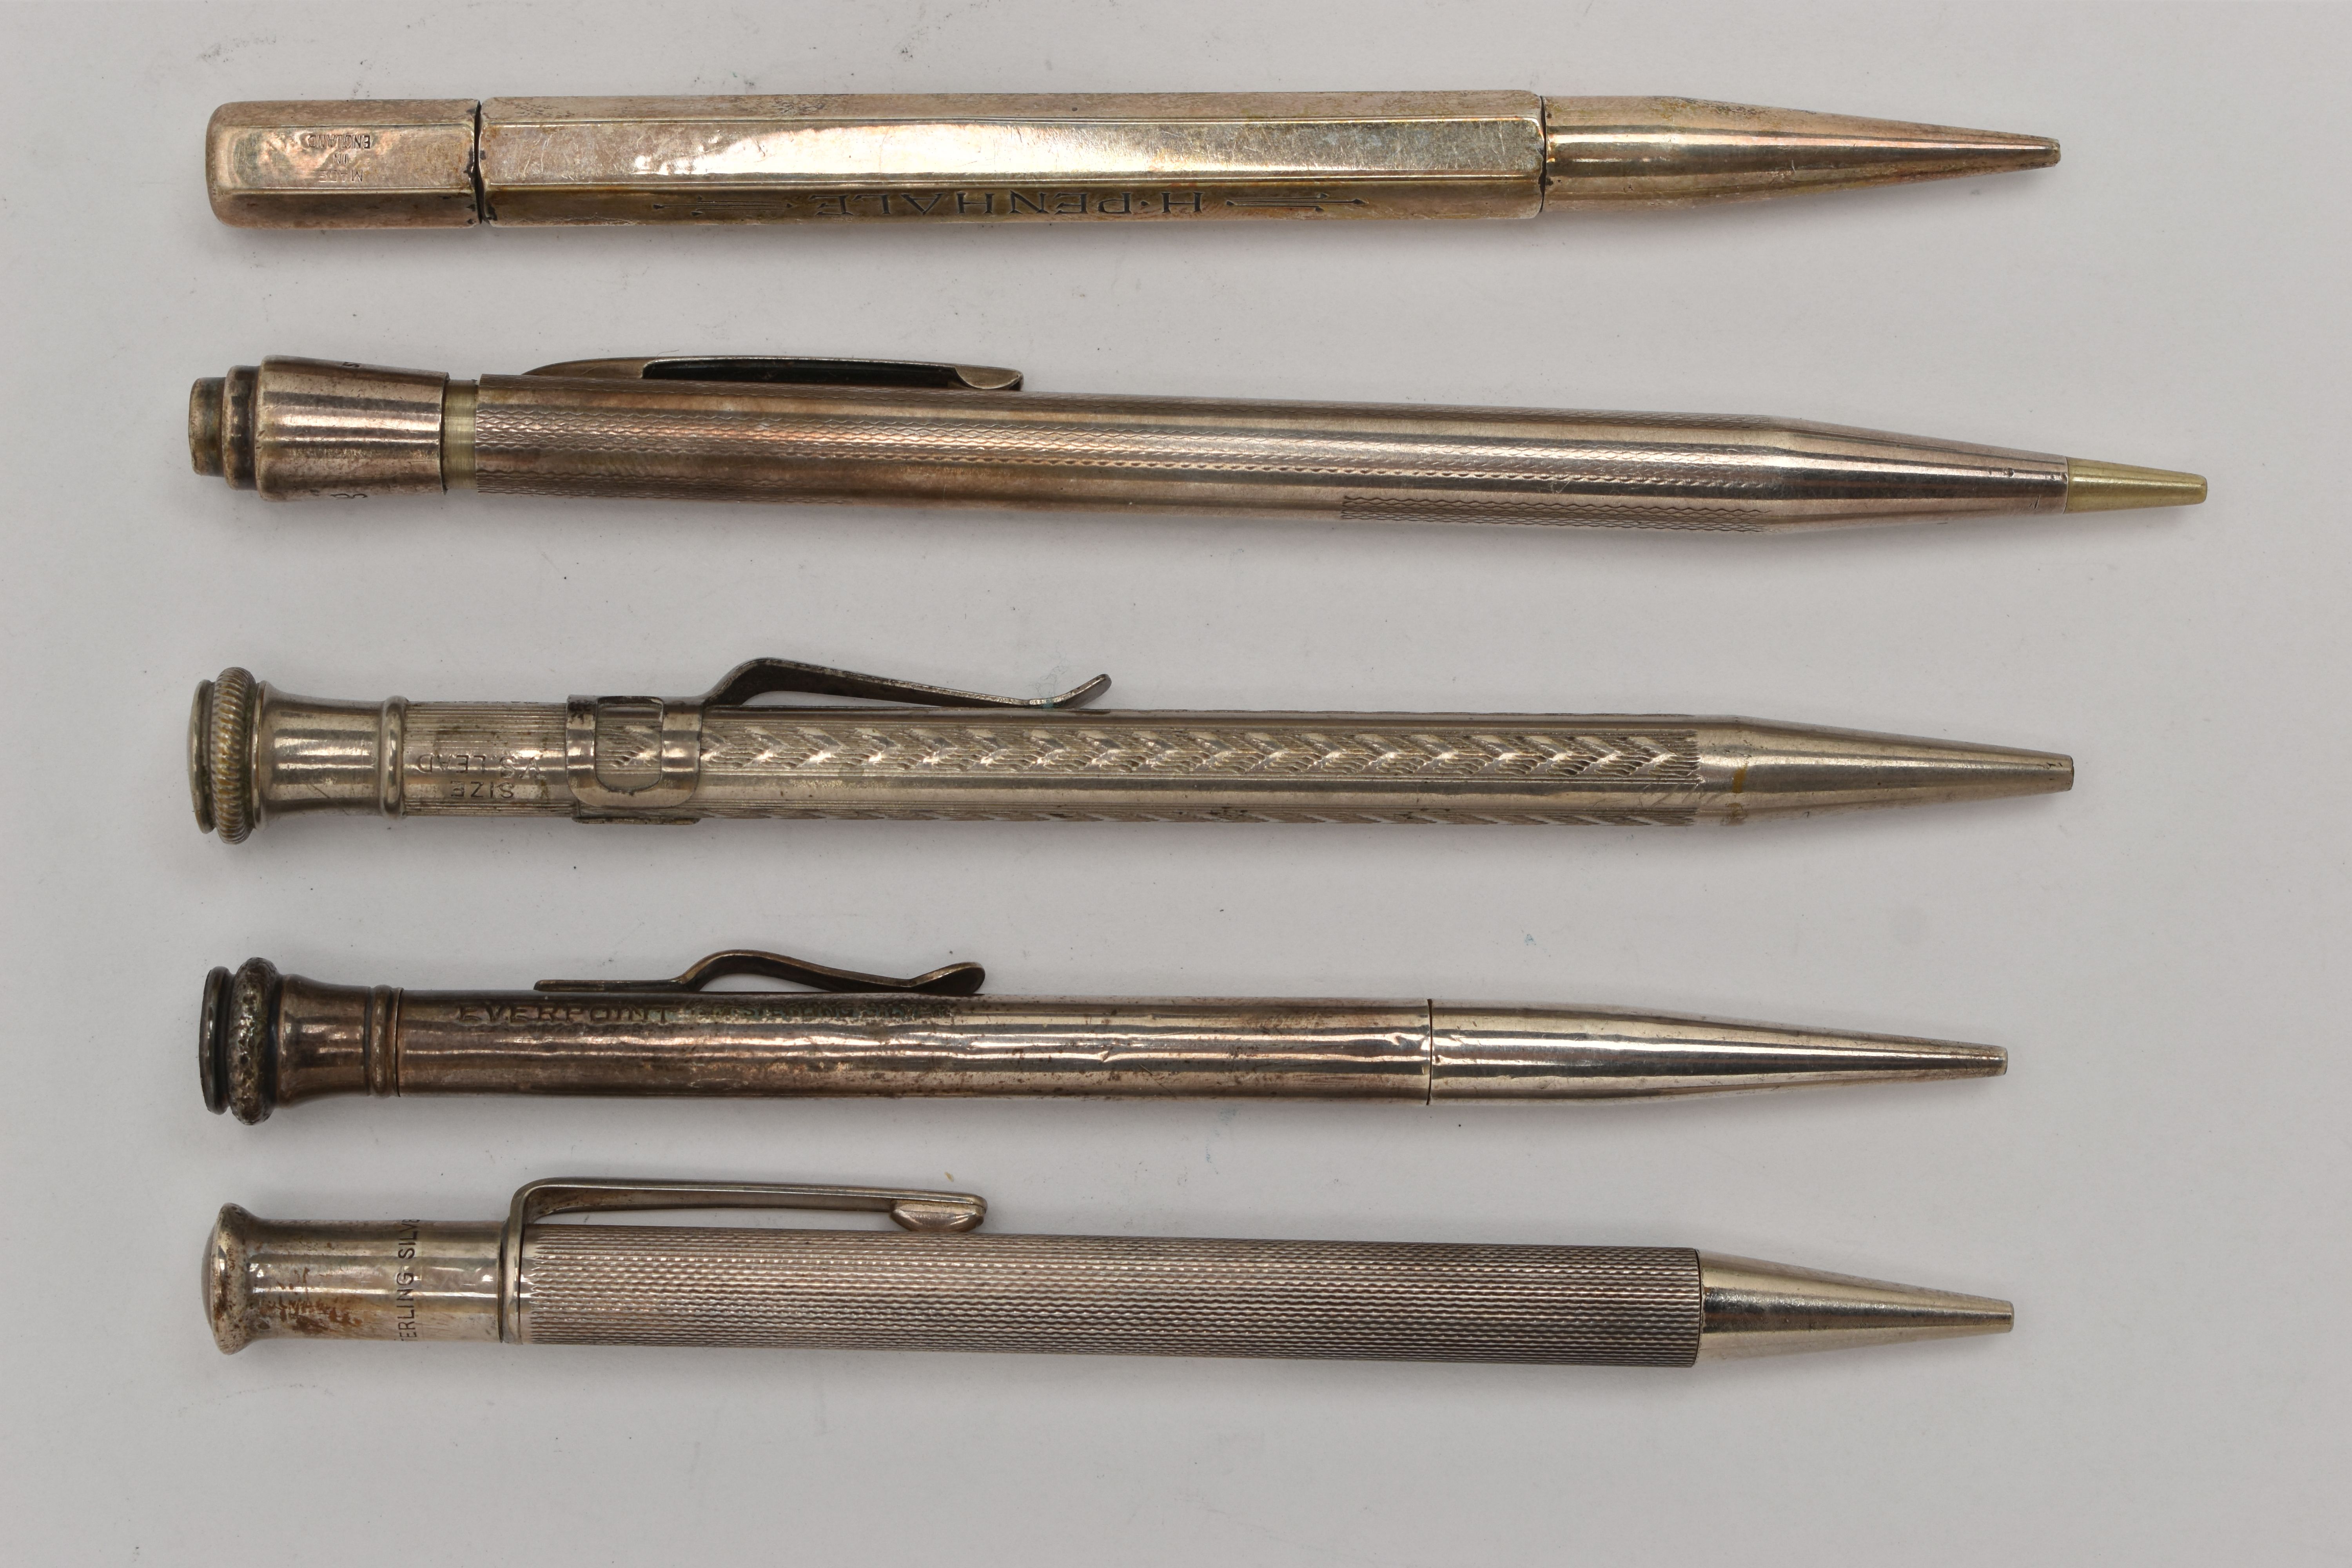 FIVE PROPELLING PENCILS, to include a silver hexagonal pencil, hallmarked 'Johnson, Matthey & Co'